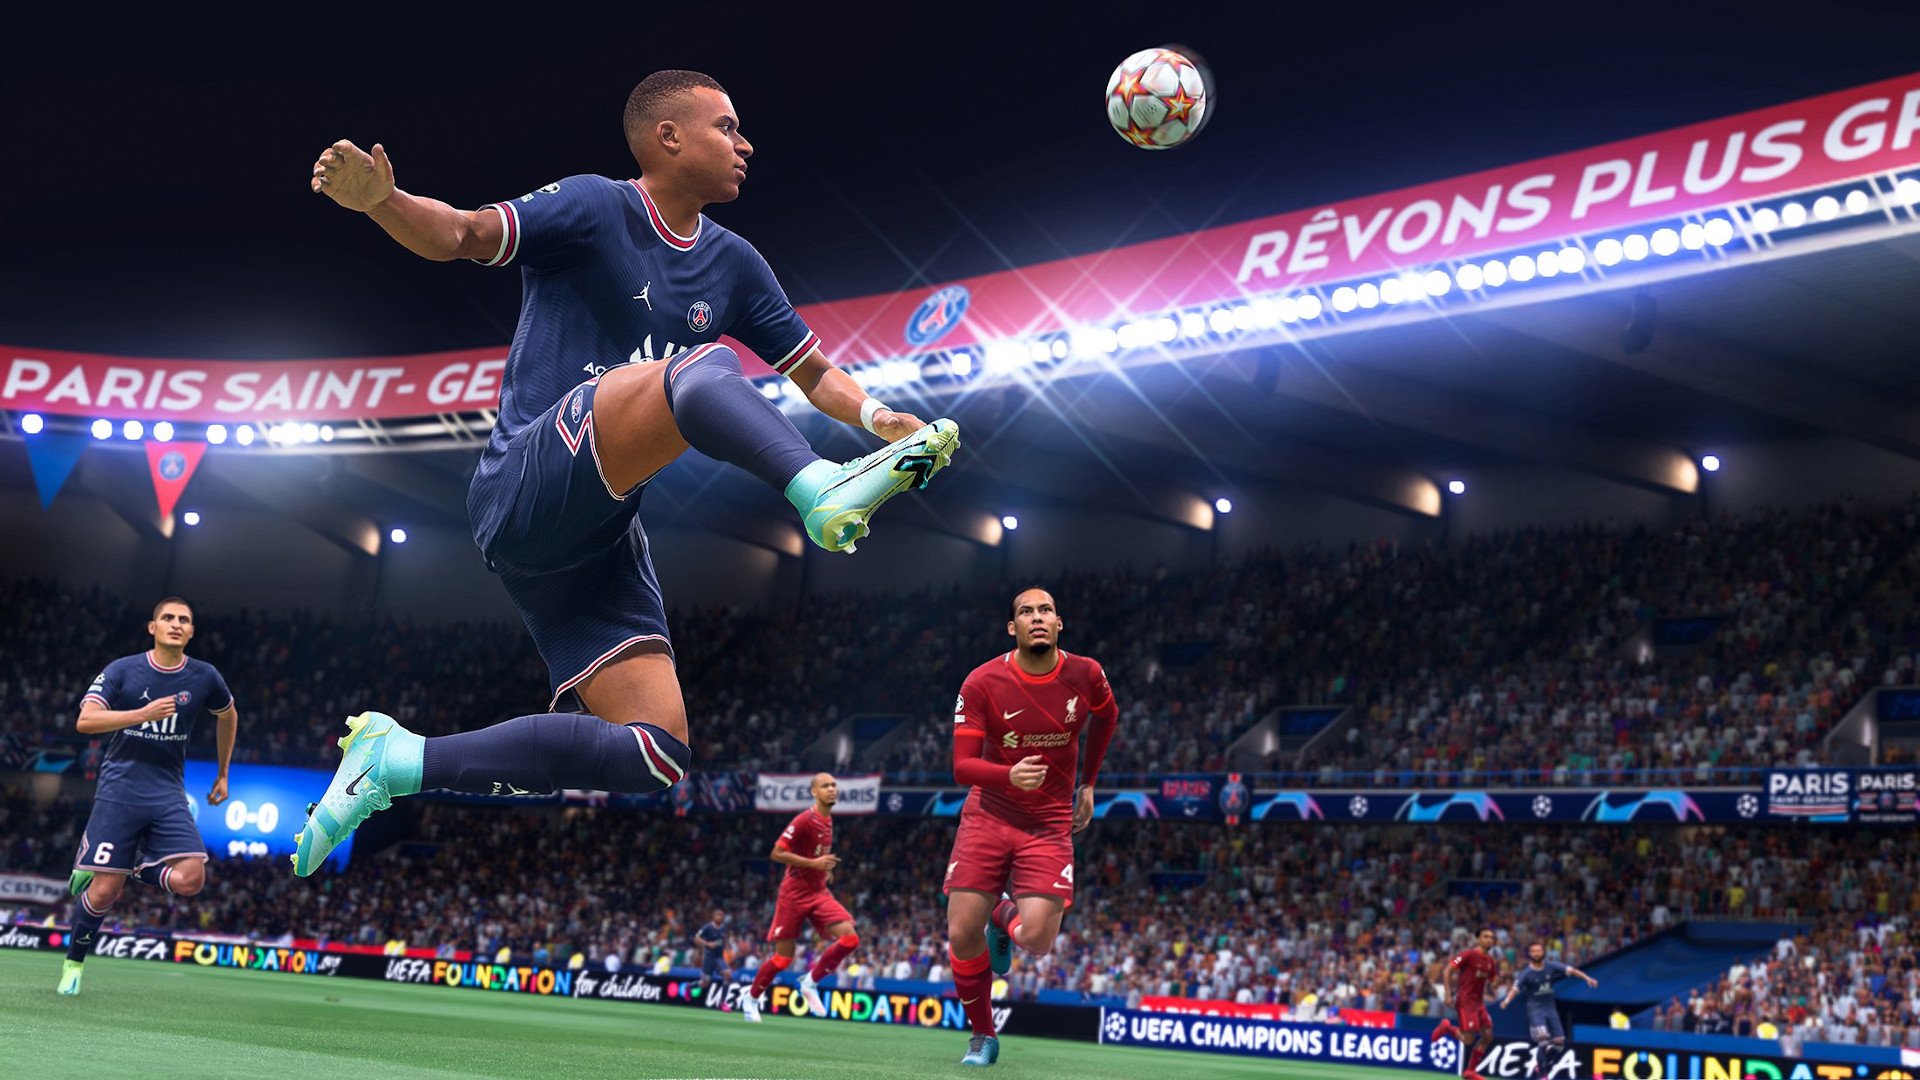 FIFA 22 5 star skillers: Mbappe goes for a volley.